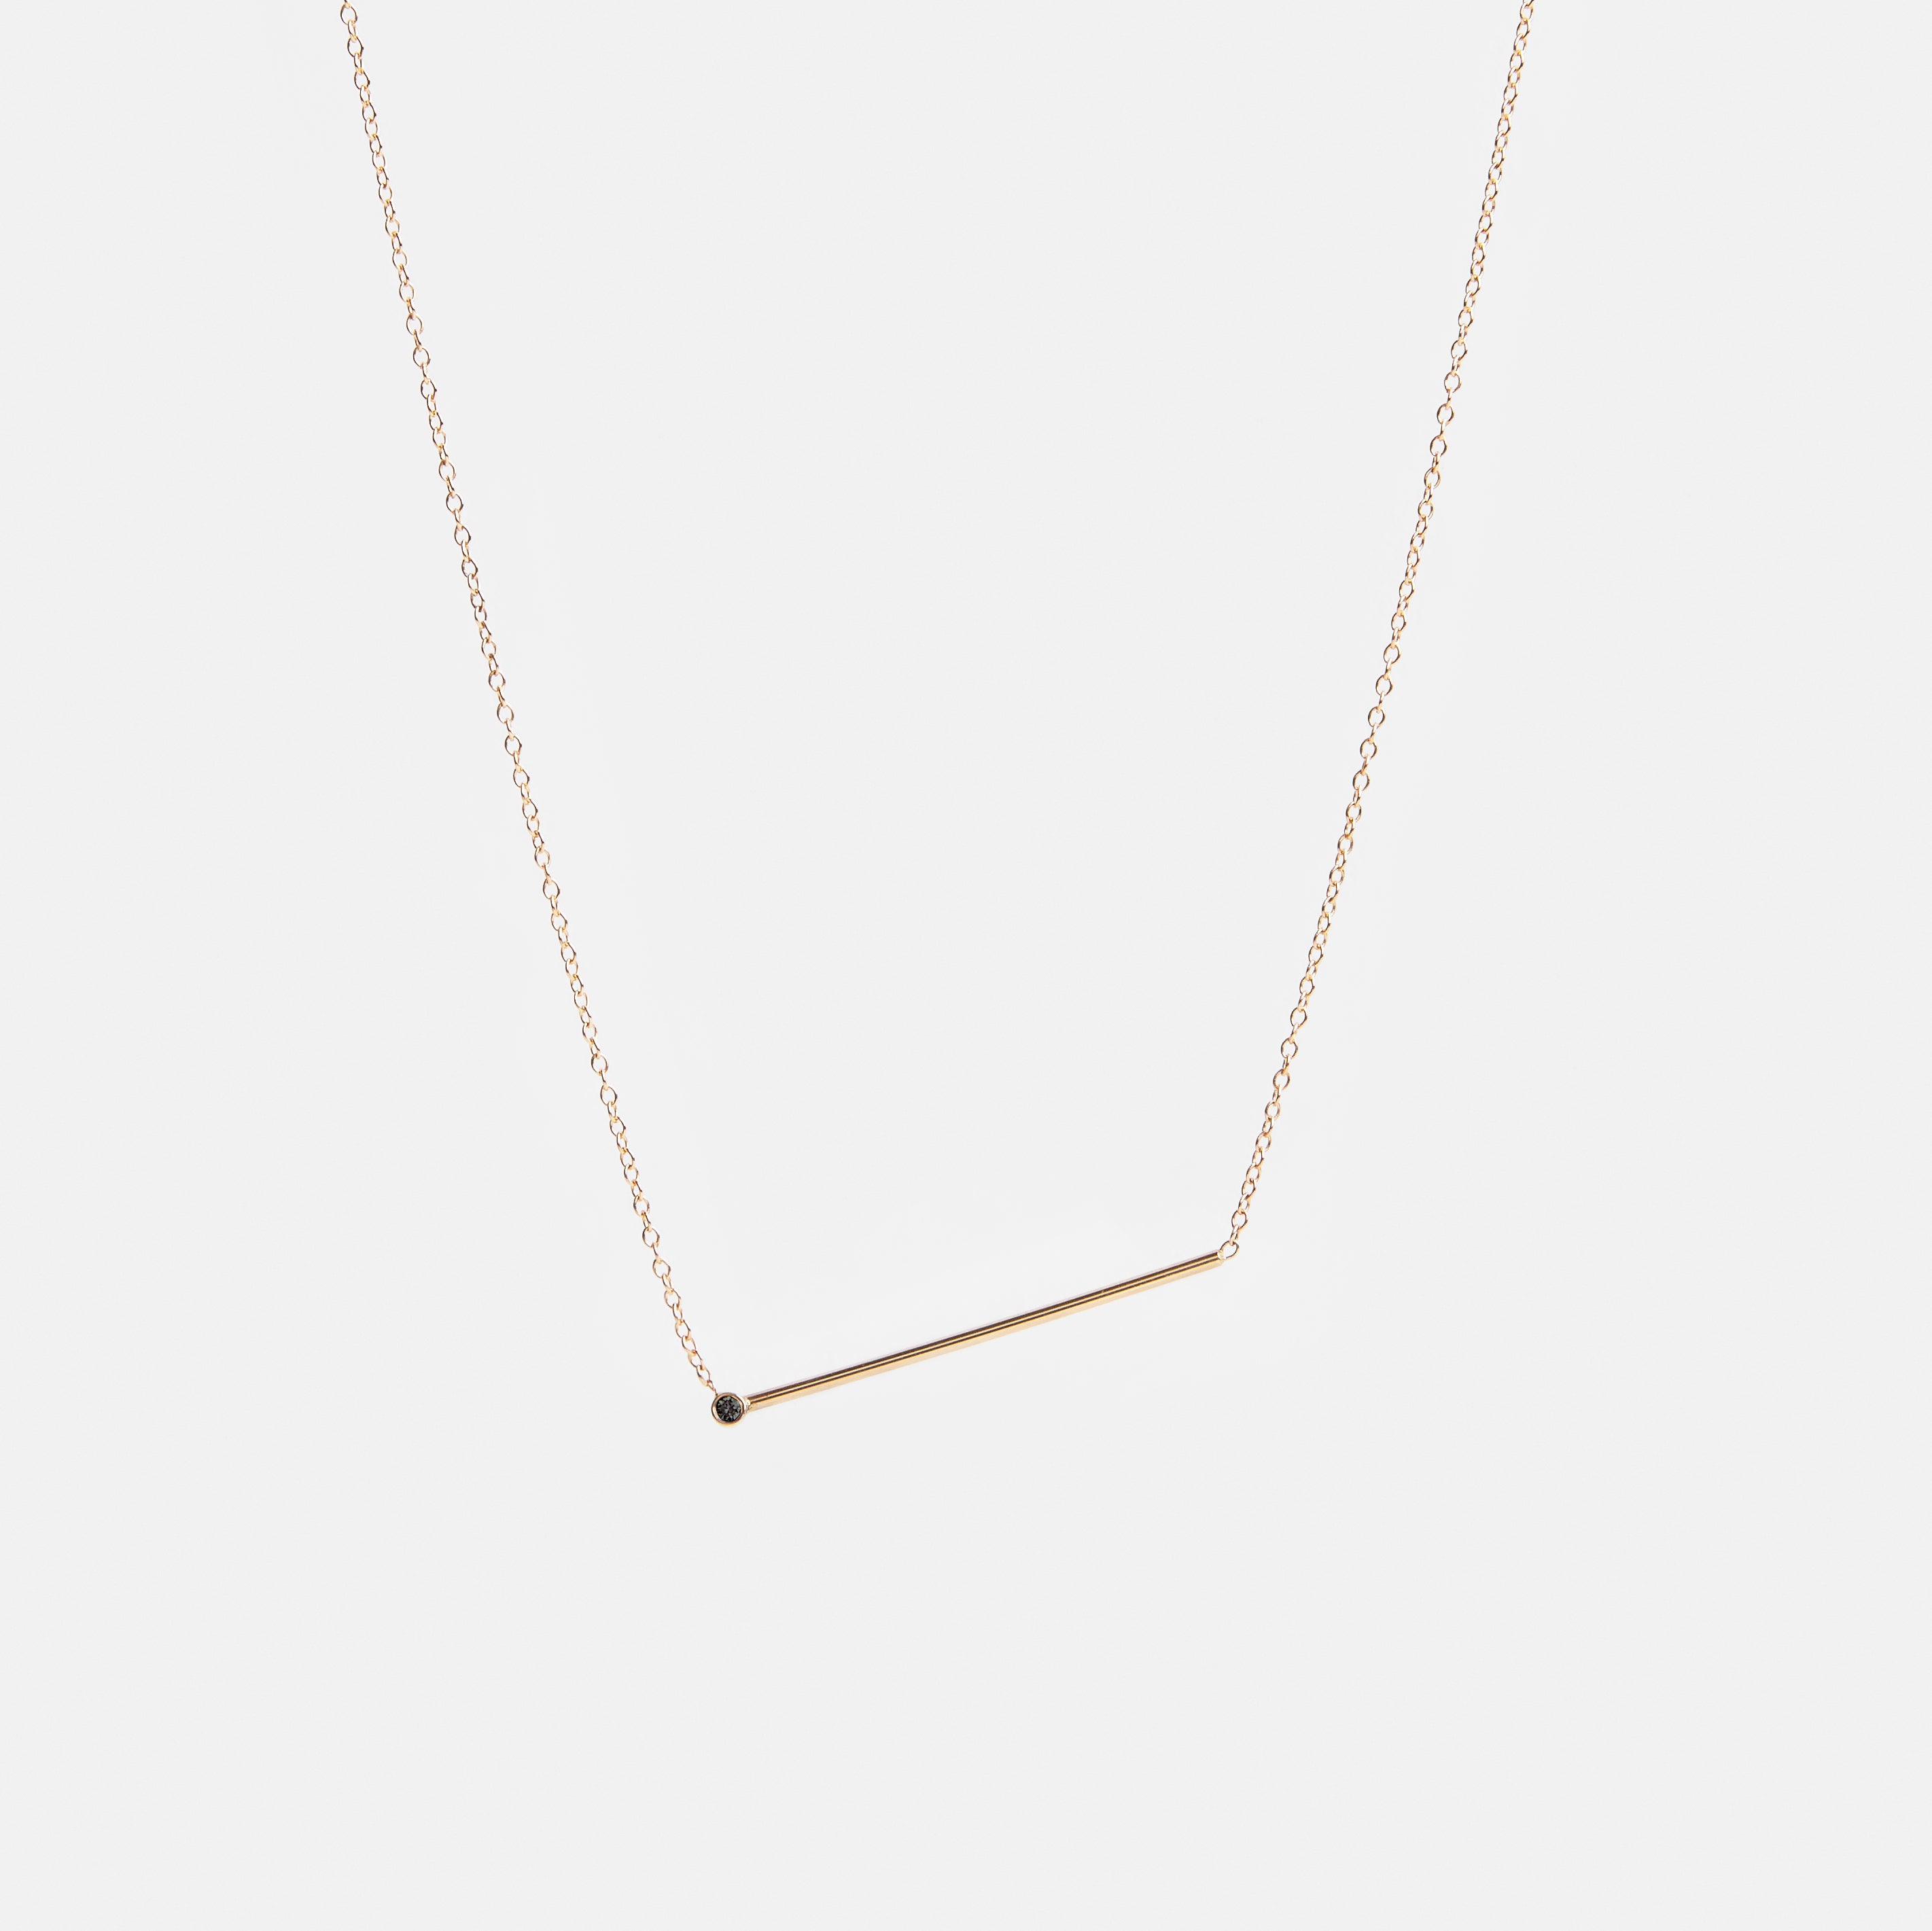 Enne Alternative Necklace in 14k Gold set with Green Diamond By SHW Fine Jewelry NYC